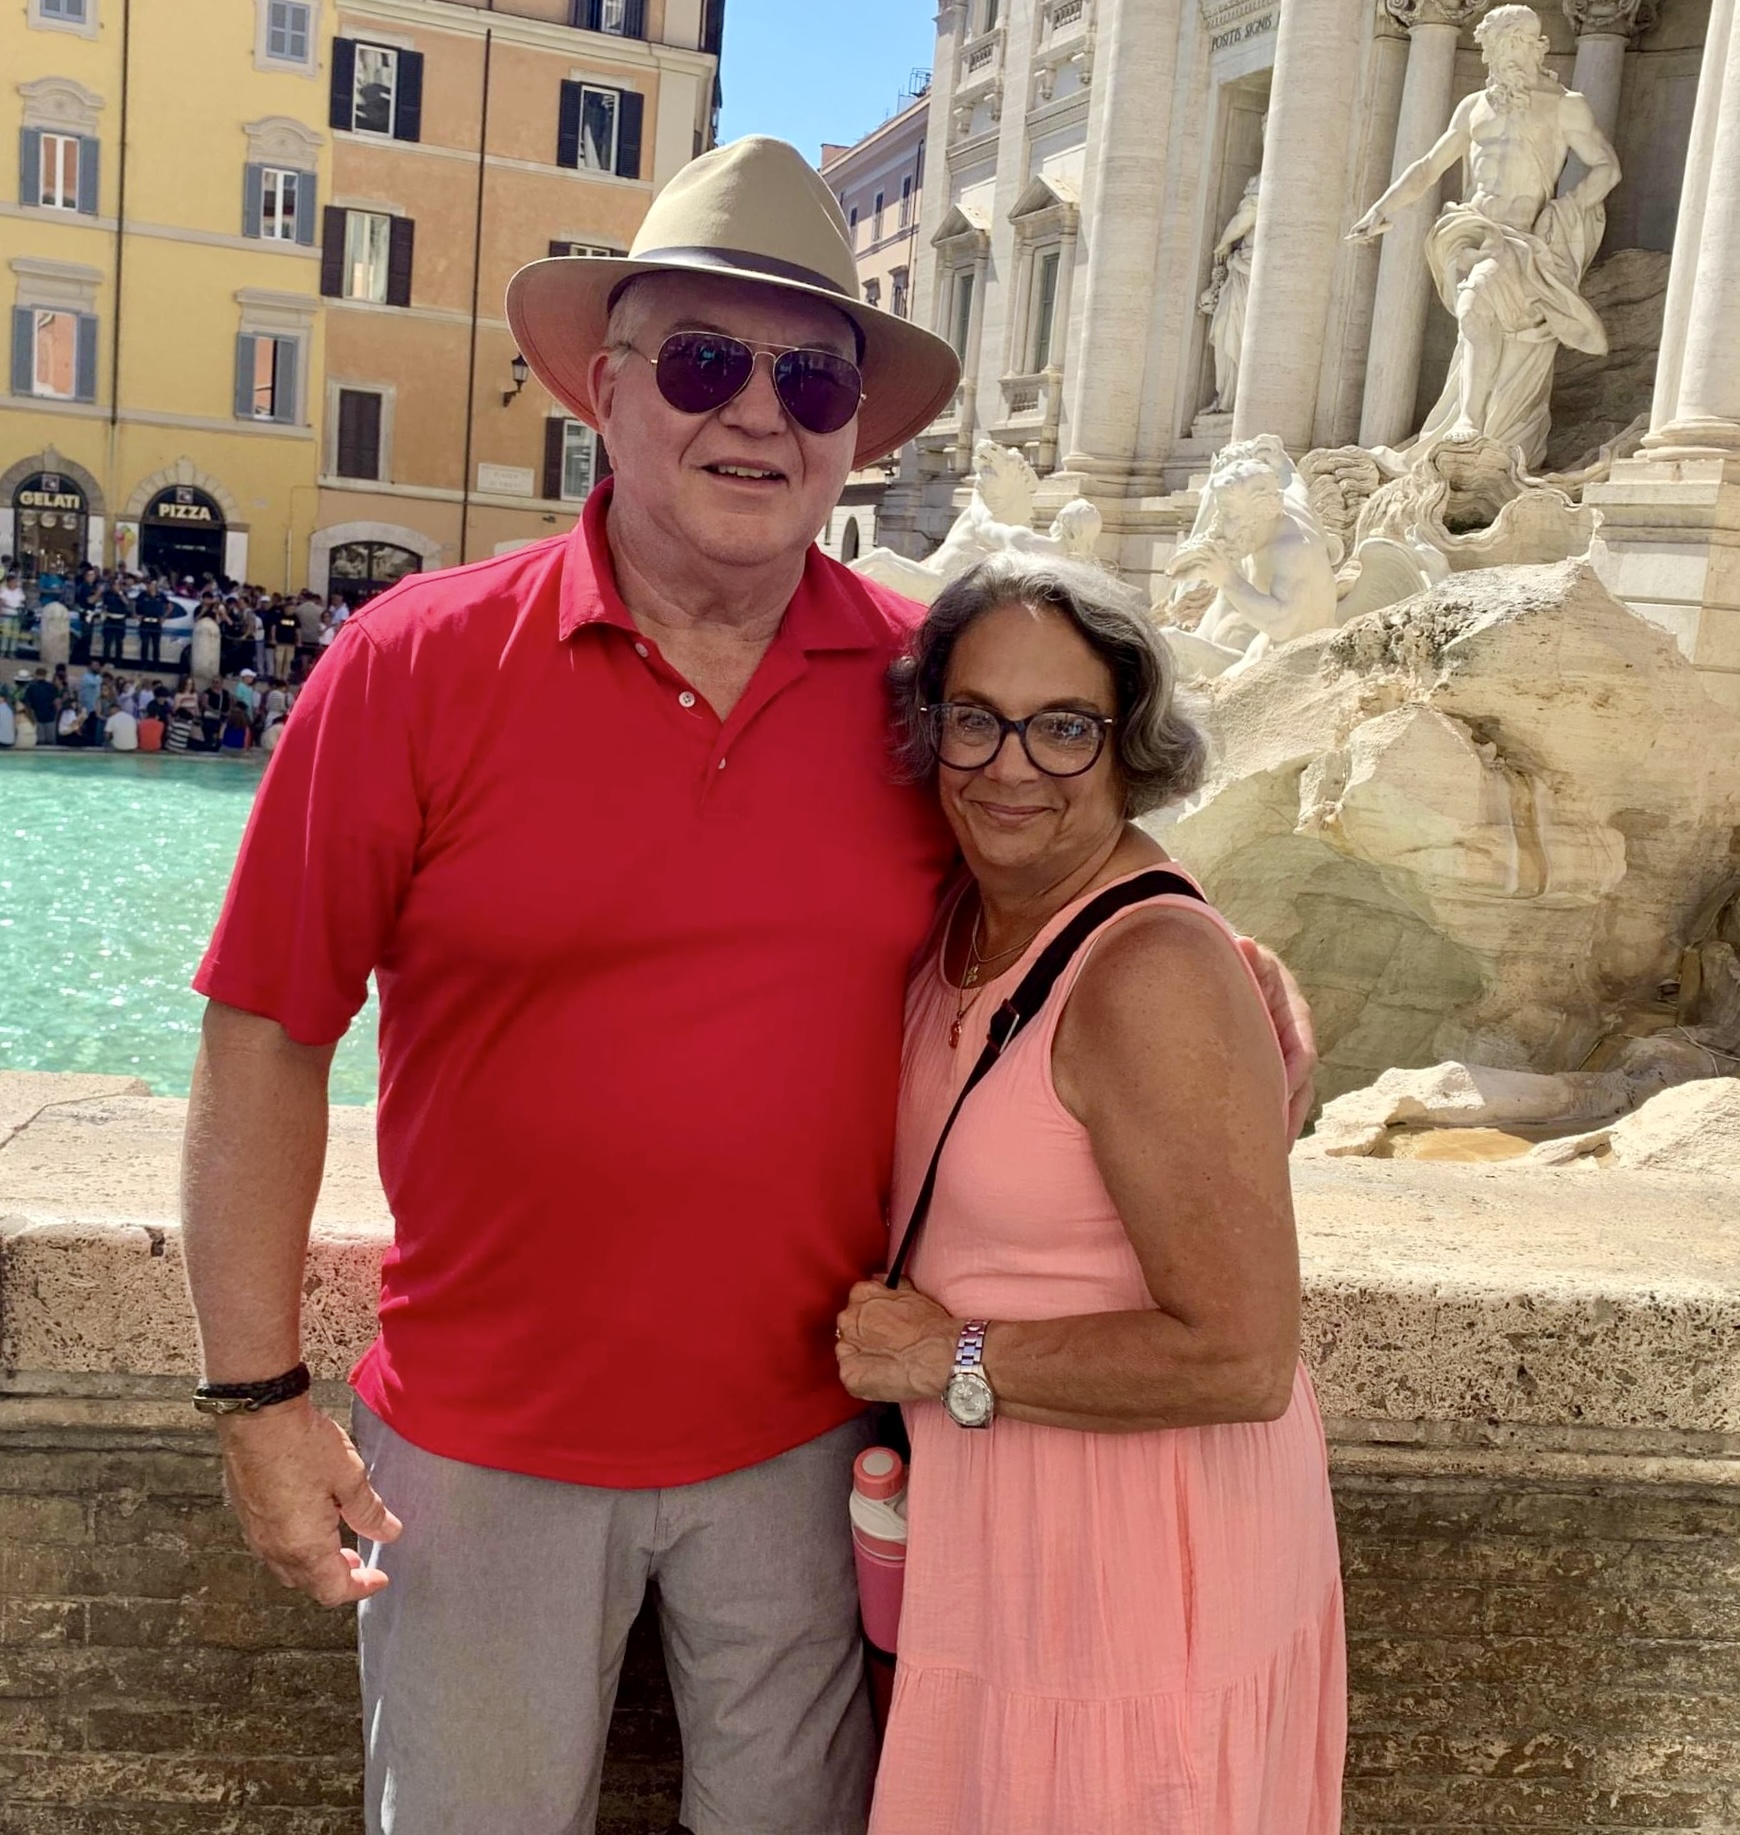 Husband and wife posing for a photo in front of Trevi Fountain